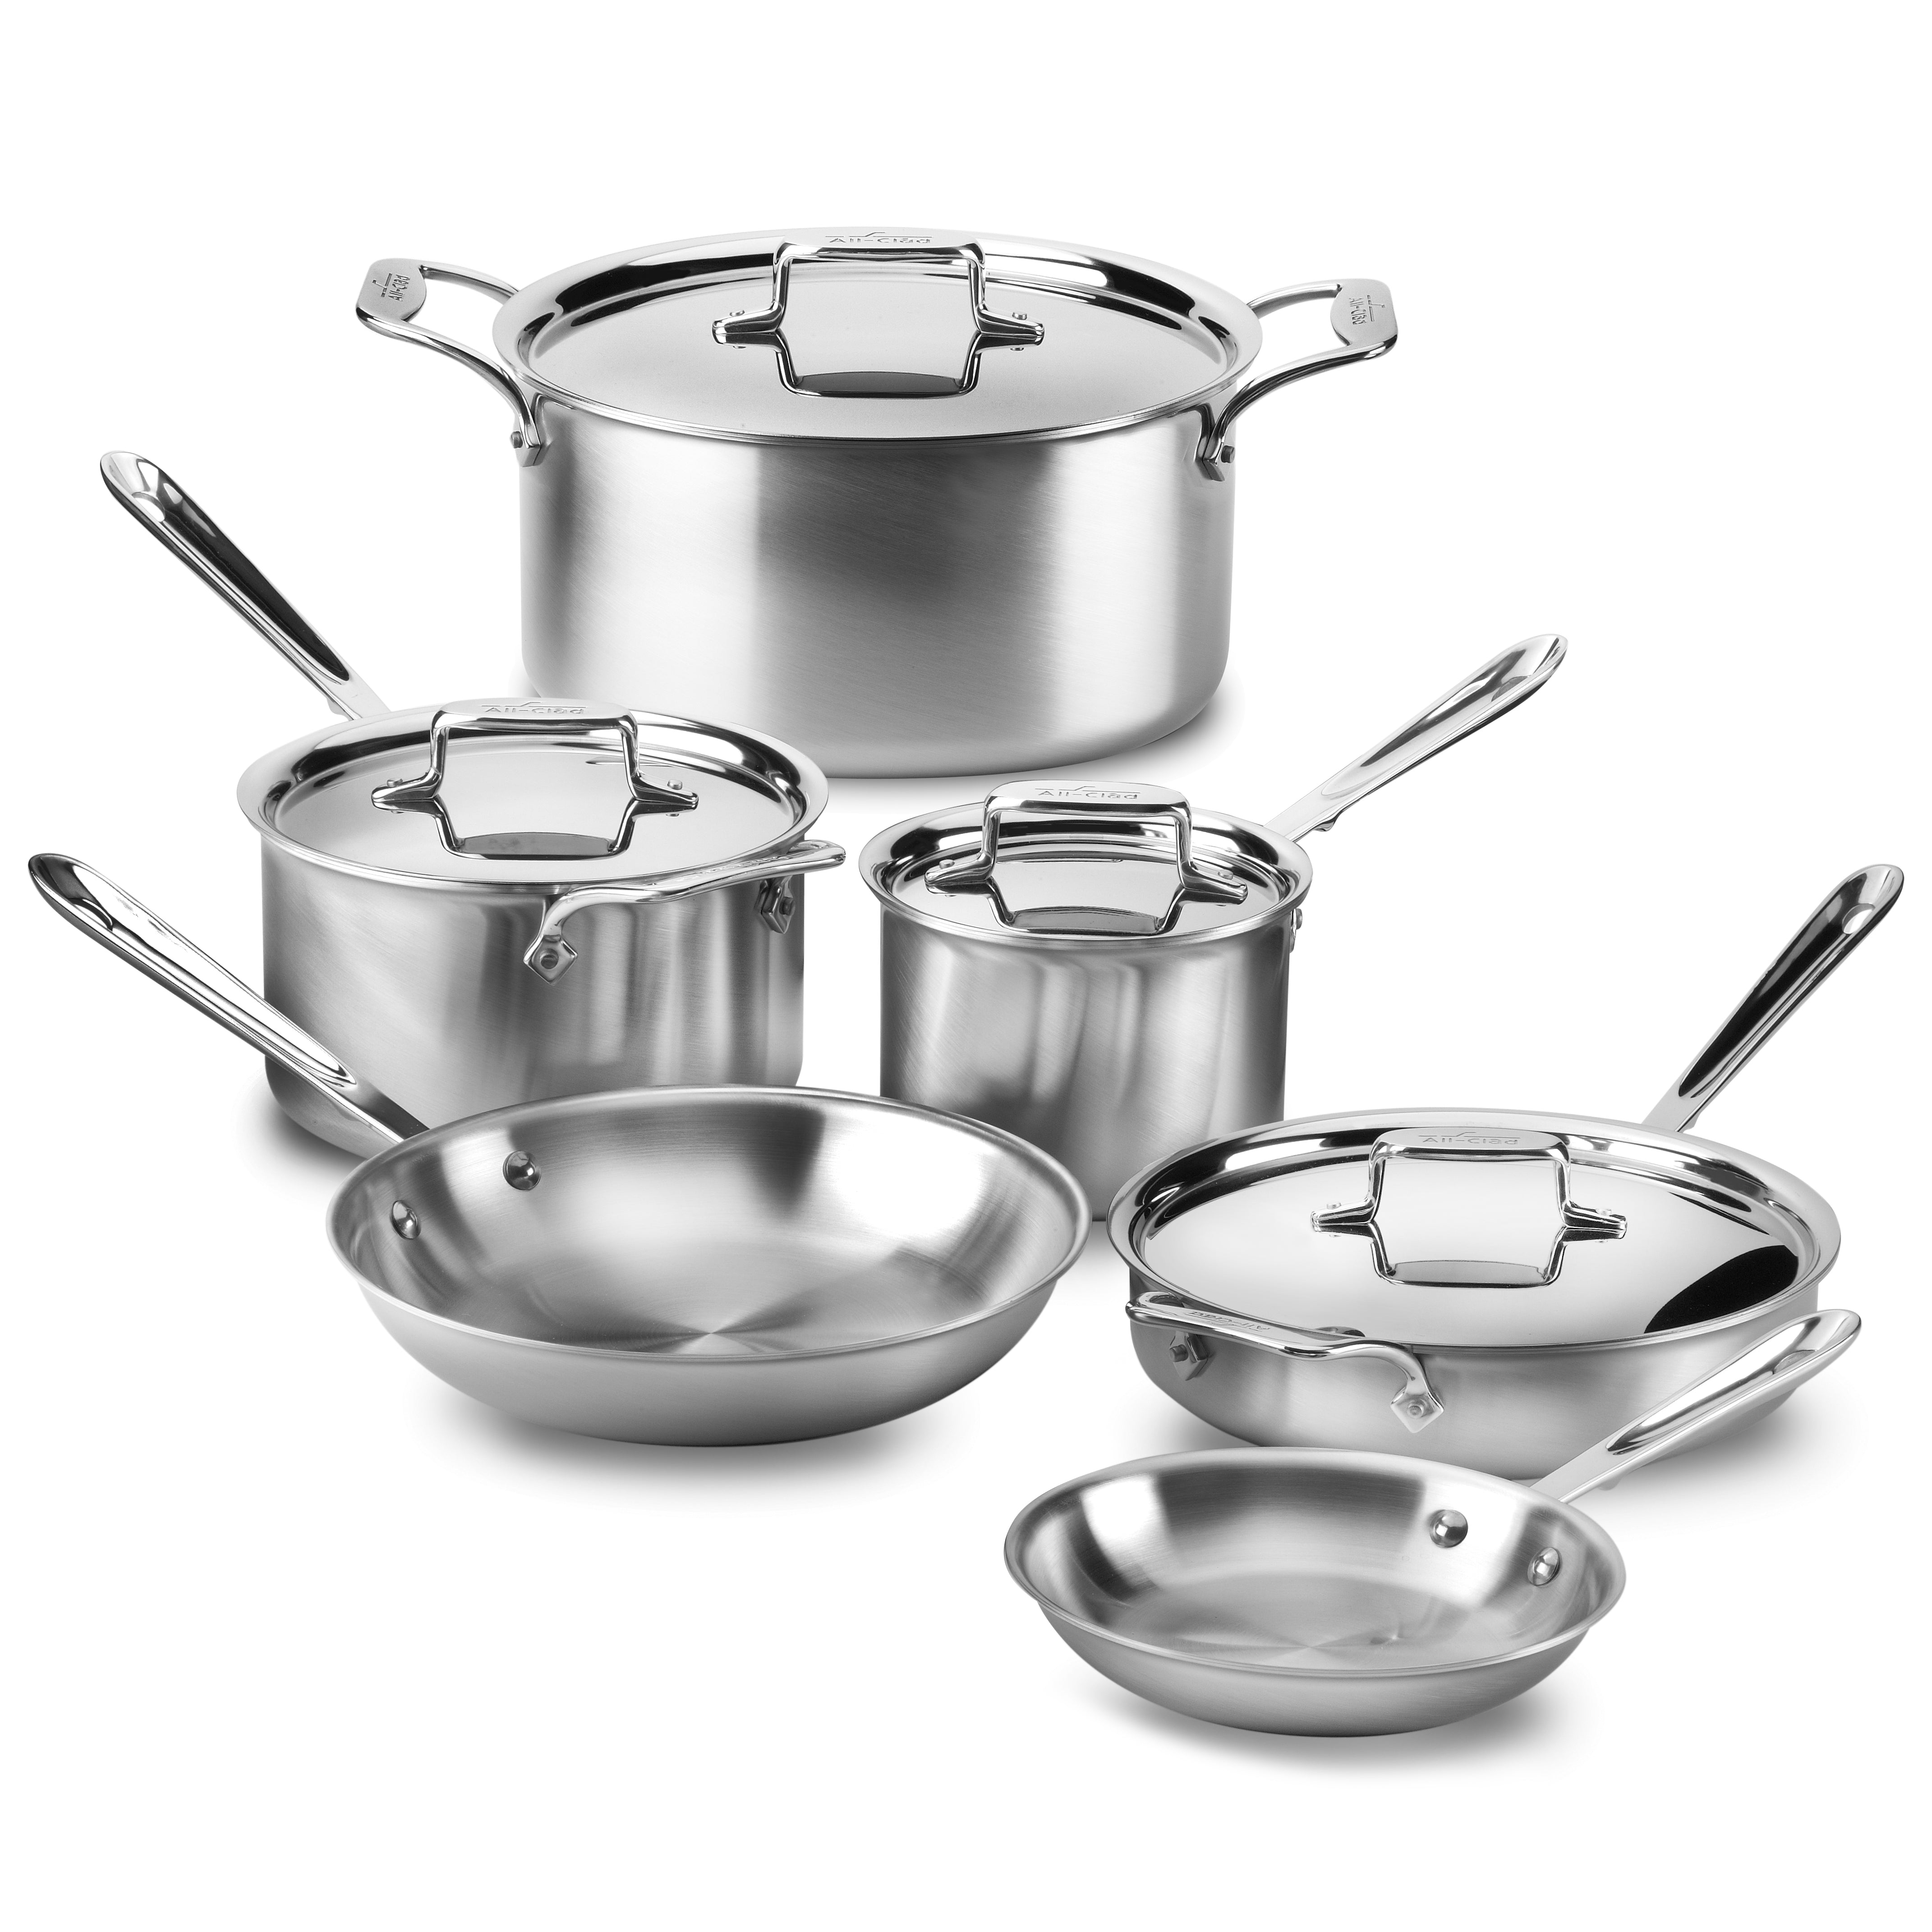 All-Clad d5 Soup Pot - 4-quart Brushed Stainless Steel – Cutlery and More